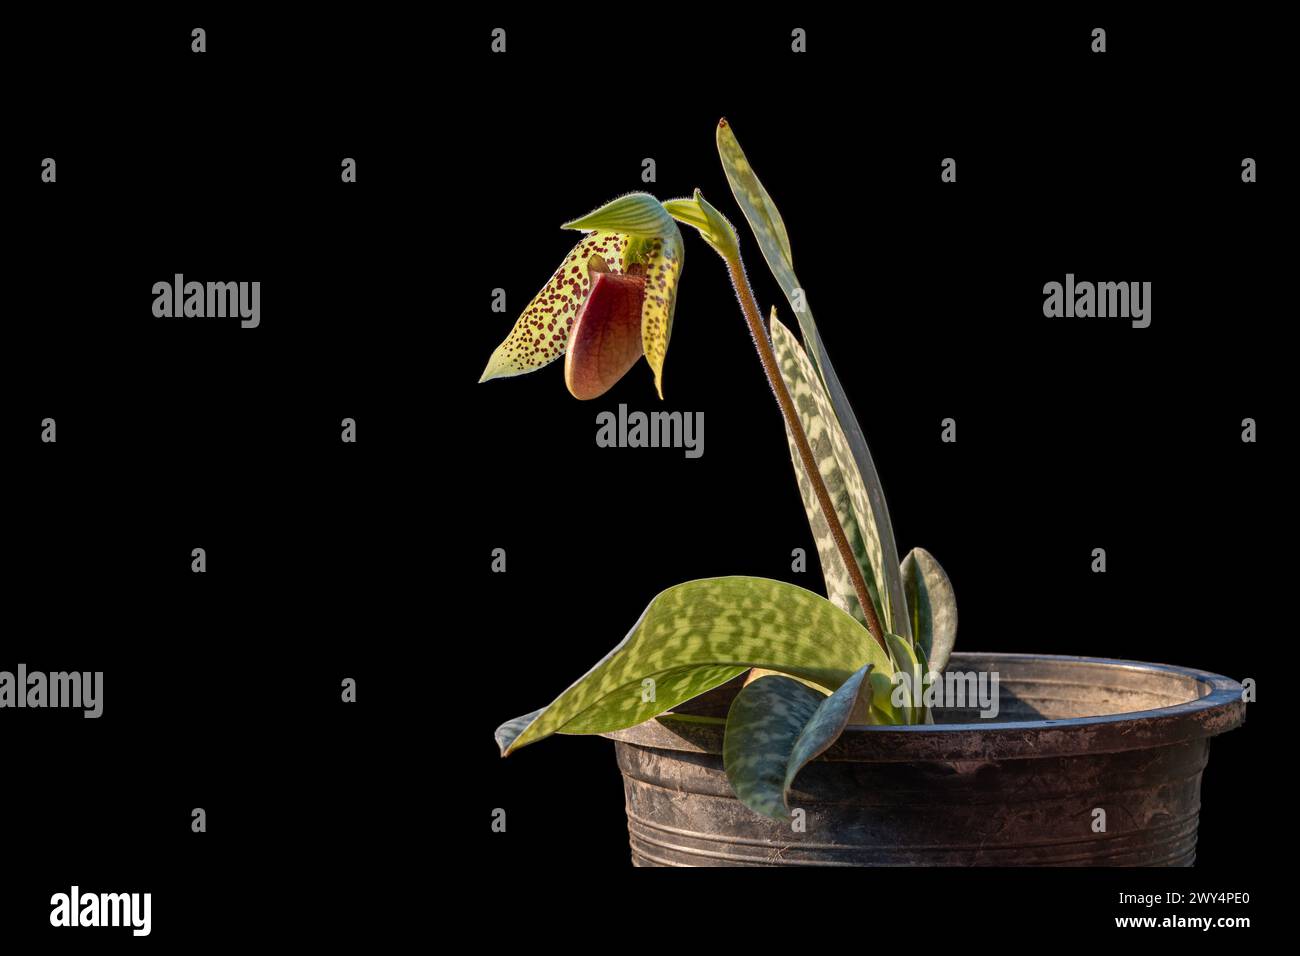 Closeup view of lady slipper orchid species paphiopedilum sukhakulii with purple red and green flower opening in sunlight isolated on black background Stock Photo